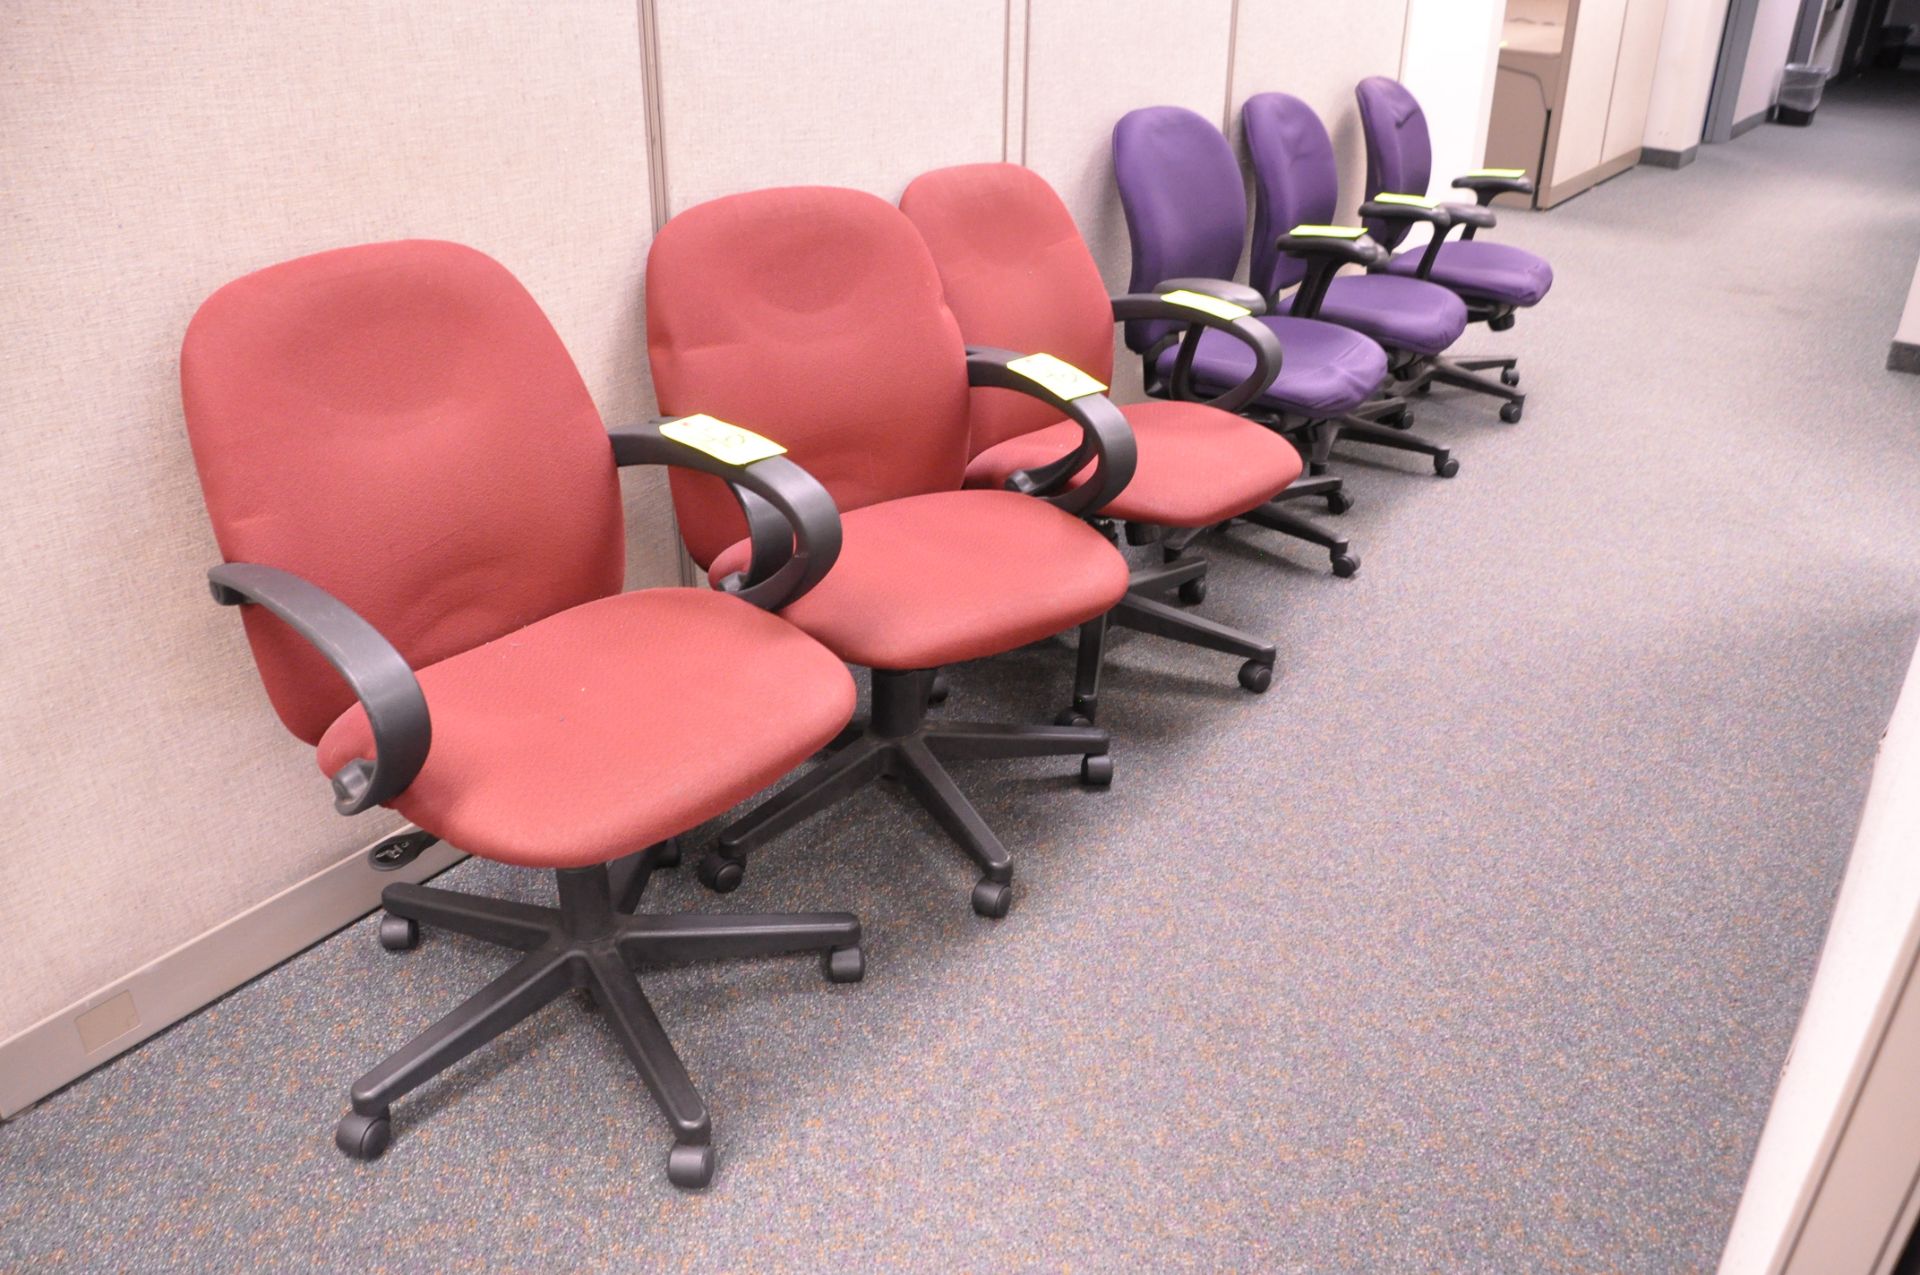 Lot-(3) Purple and (3) Red Upholstered Swivel Arm Office Chairs in (1) Group, (Located 2nd Floor - Image 2 of 2